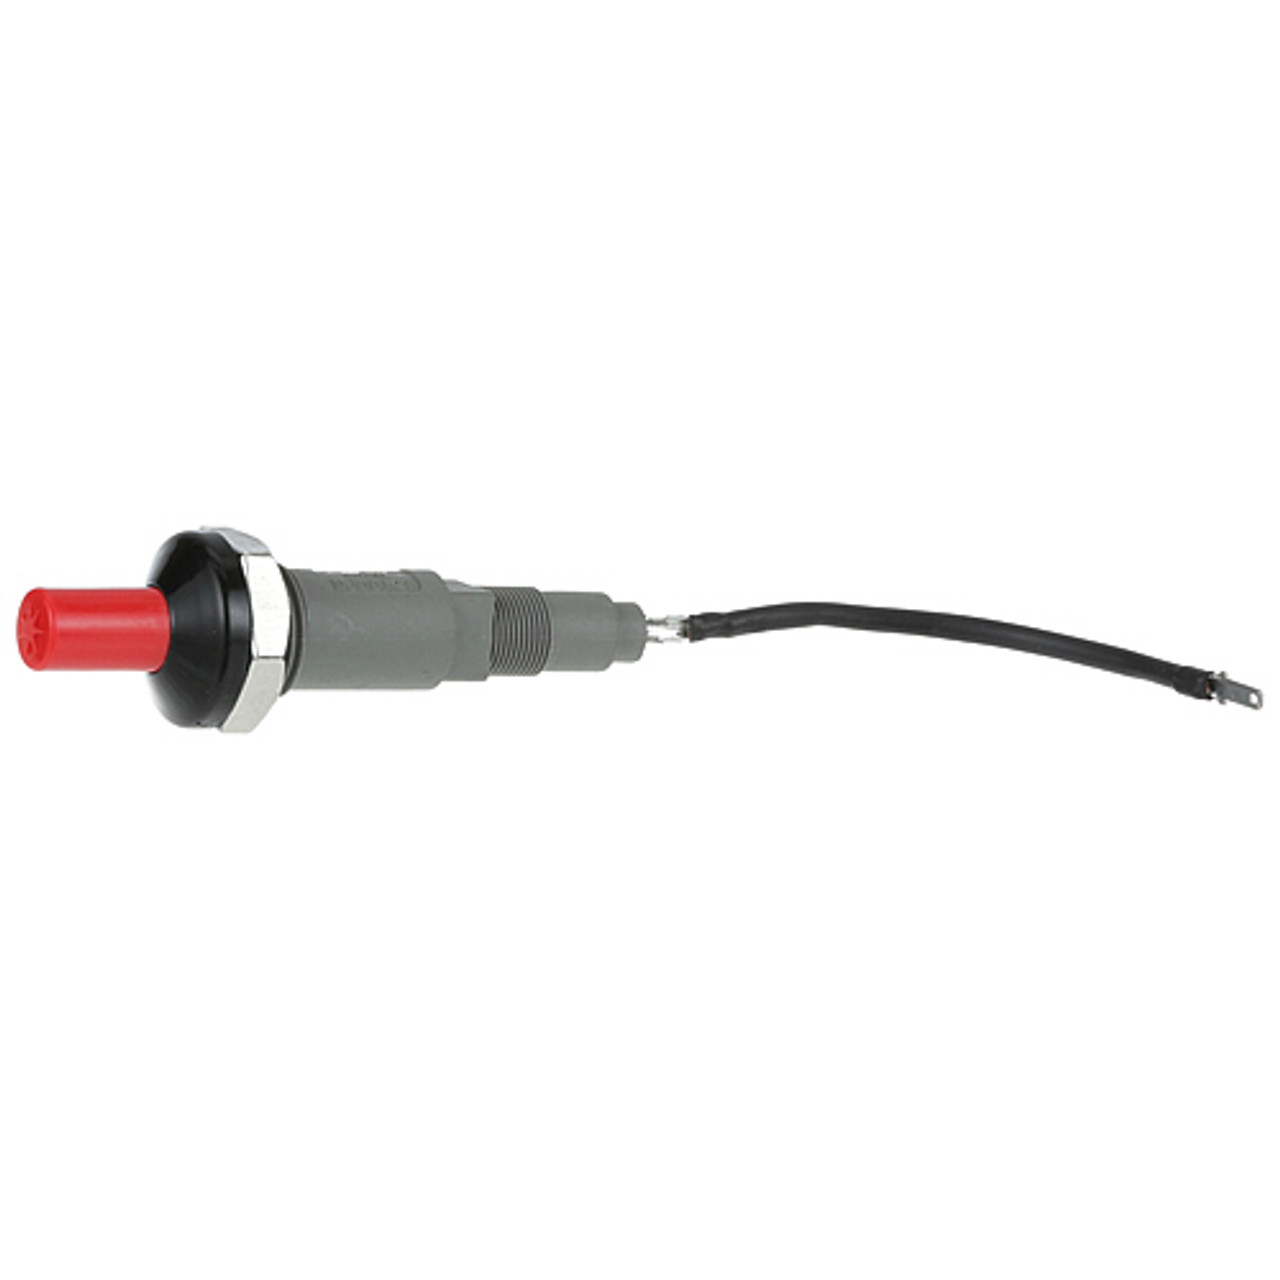 Ignitor - Replacement Part For Dynamic Cooking Systems 16025-4